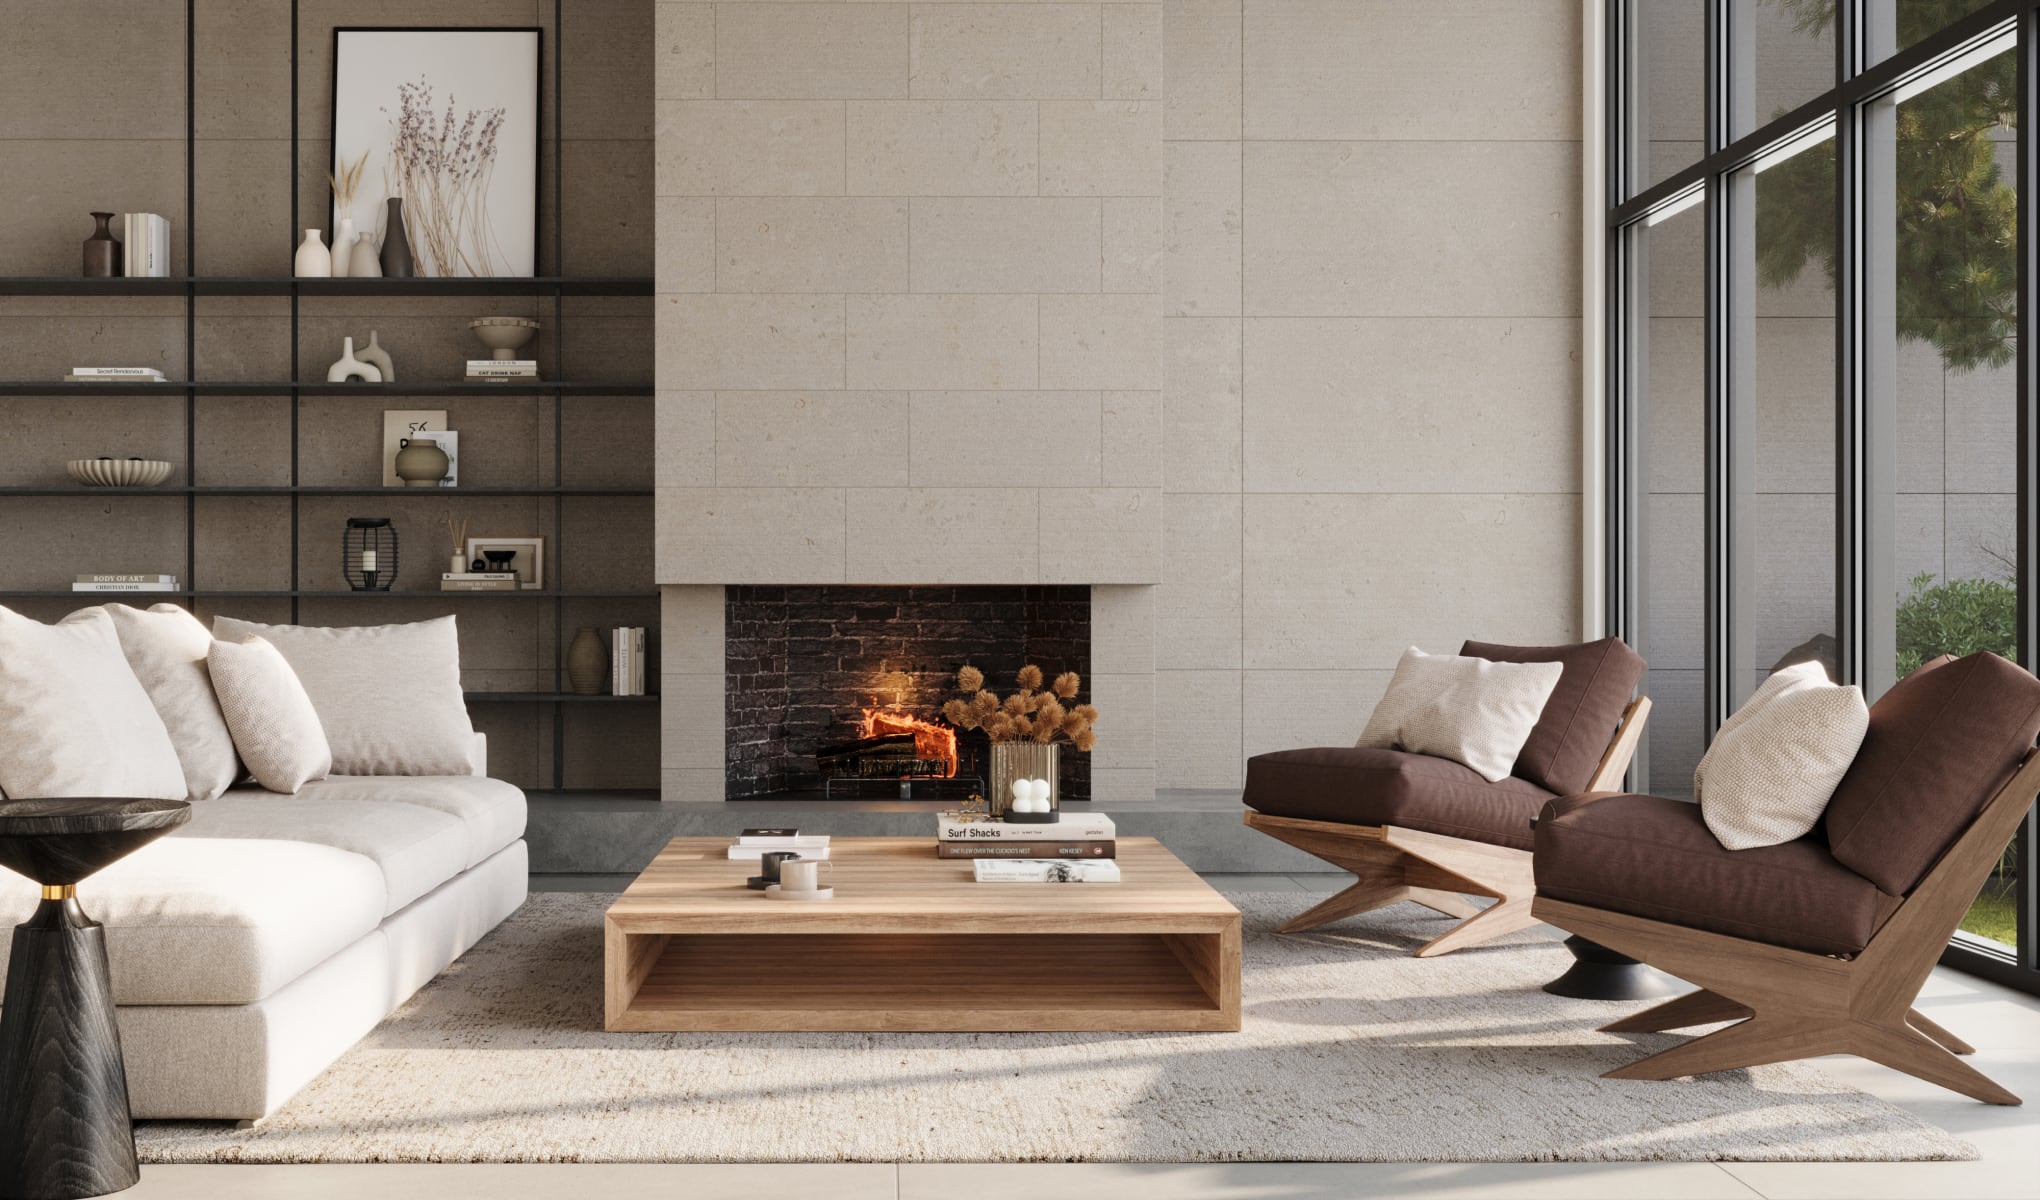 12x24 Tile adorns a modern living space's fireplace wall, melding sleek design with cozy elegance.